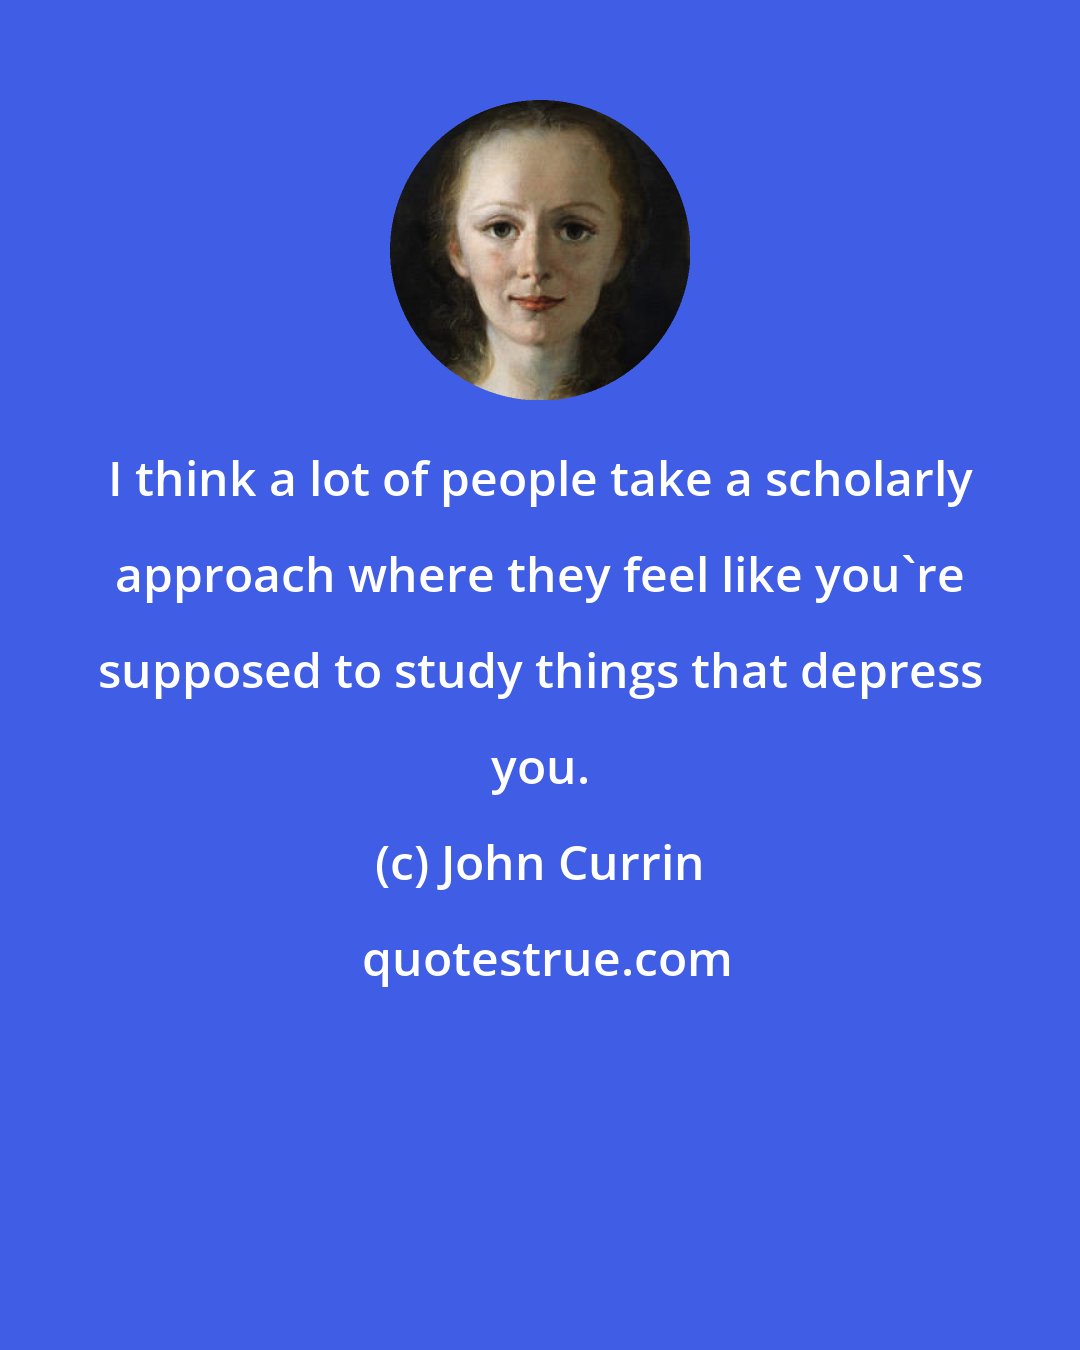 John Currin: I think a lot of people take a scholarly approach where they feel like you're supposed to study things that depress you.